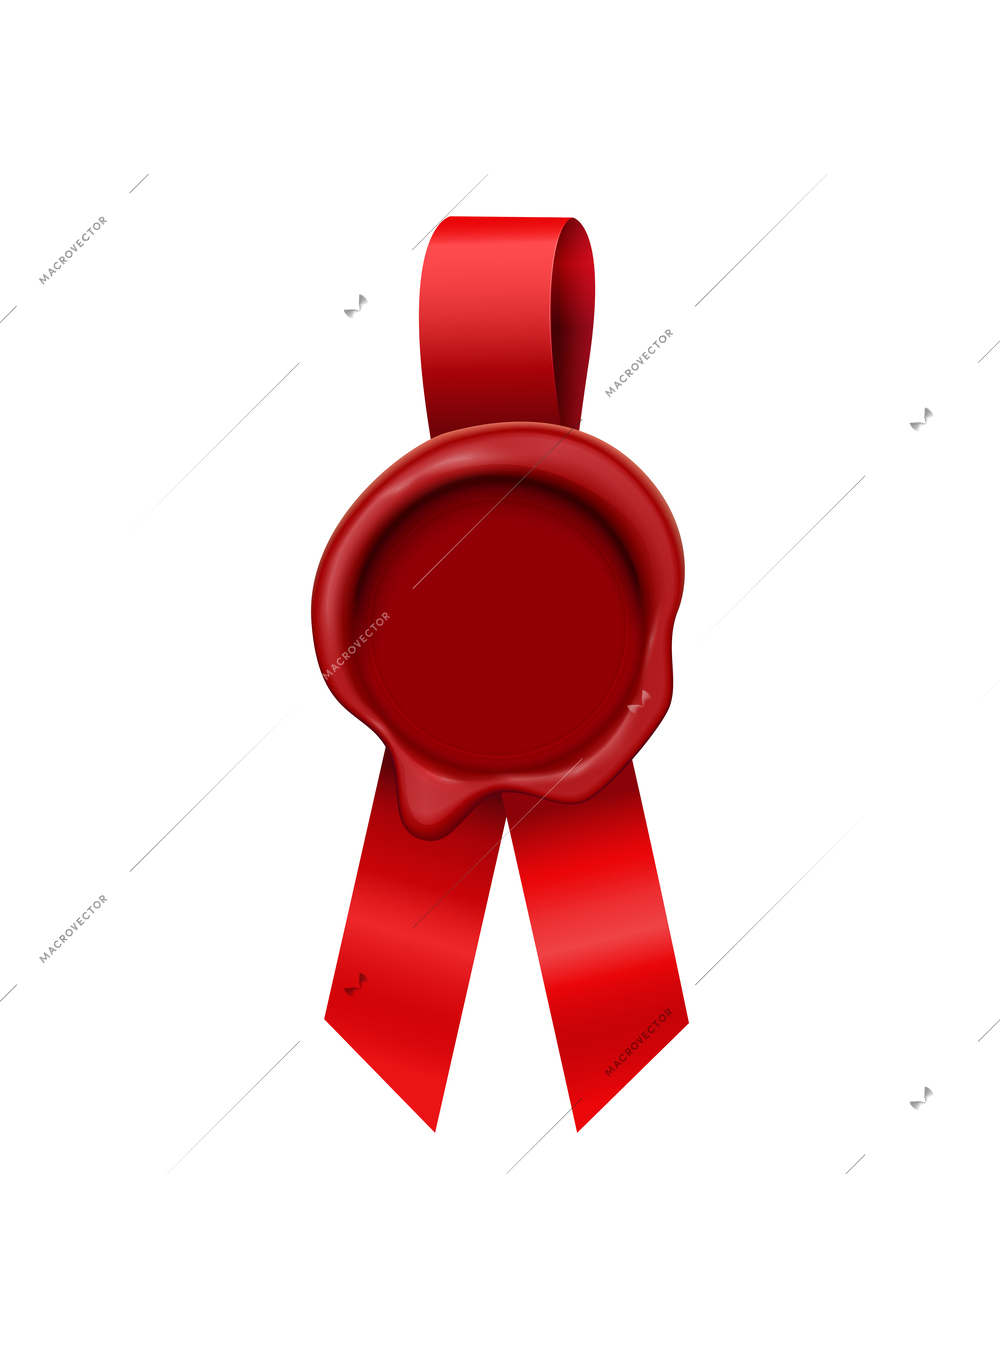 Wax stamp ribbons composition with realistic image of vintage stamp with red ribbon vector illustration